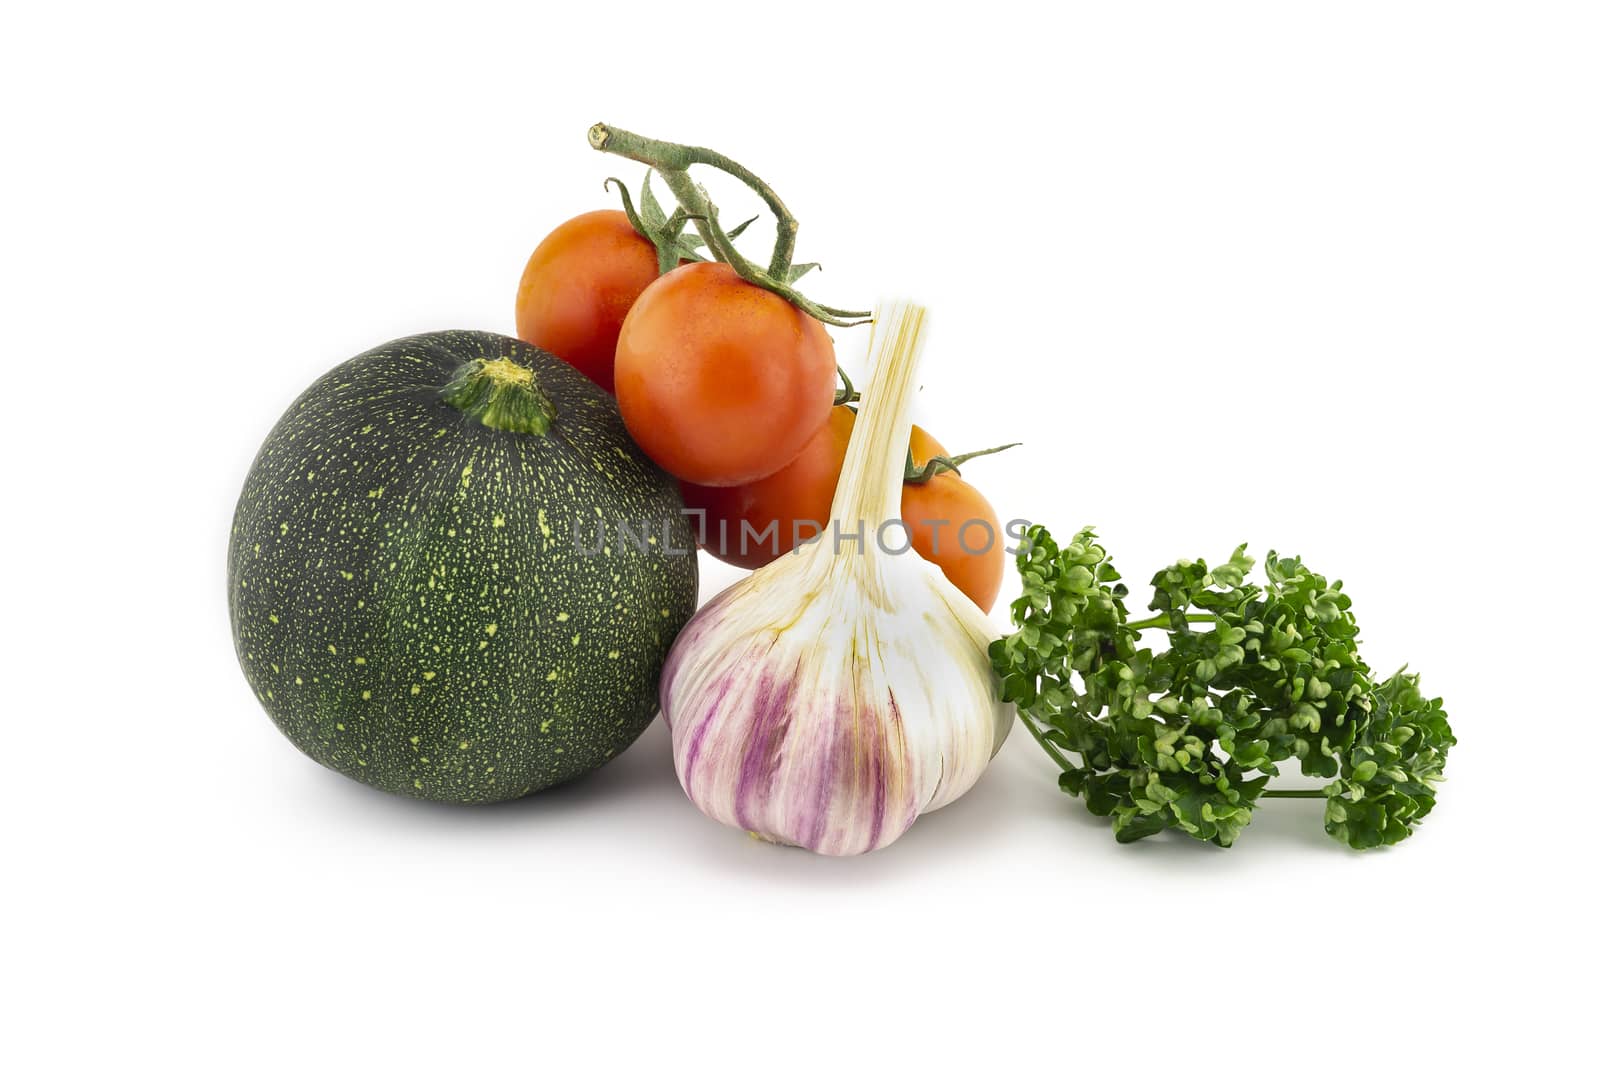 Green round courgette or zucchini, garlic knob, cherry tomato twig and fresh parsley sprigs isolated on white background